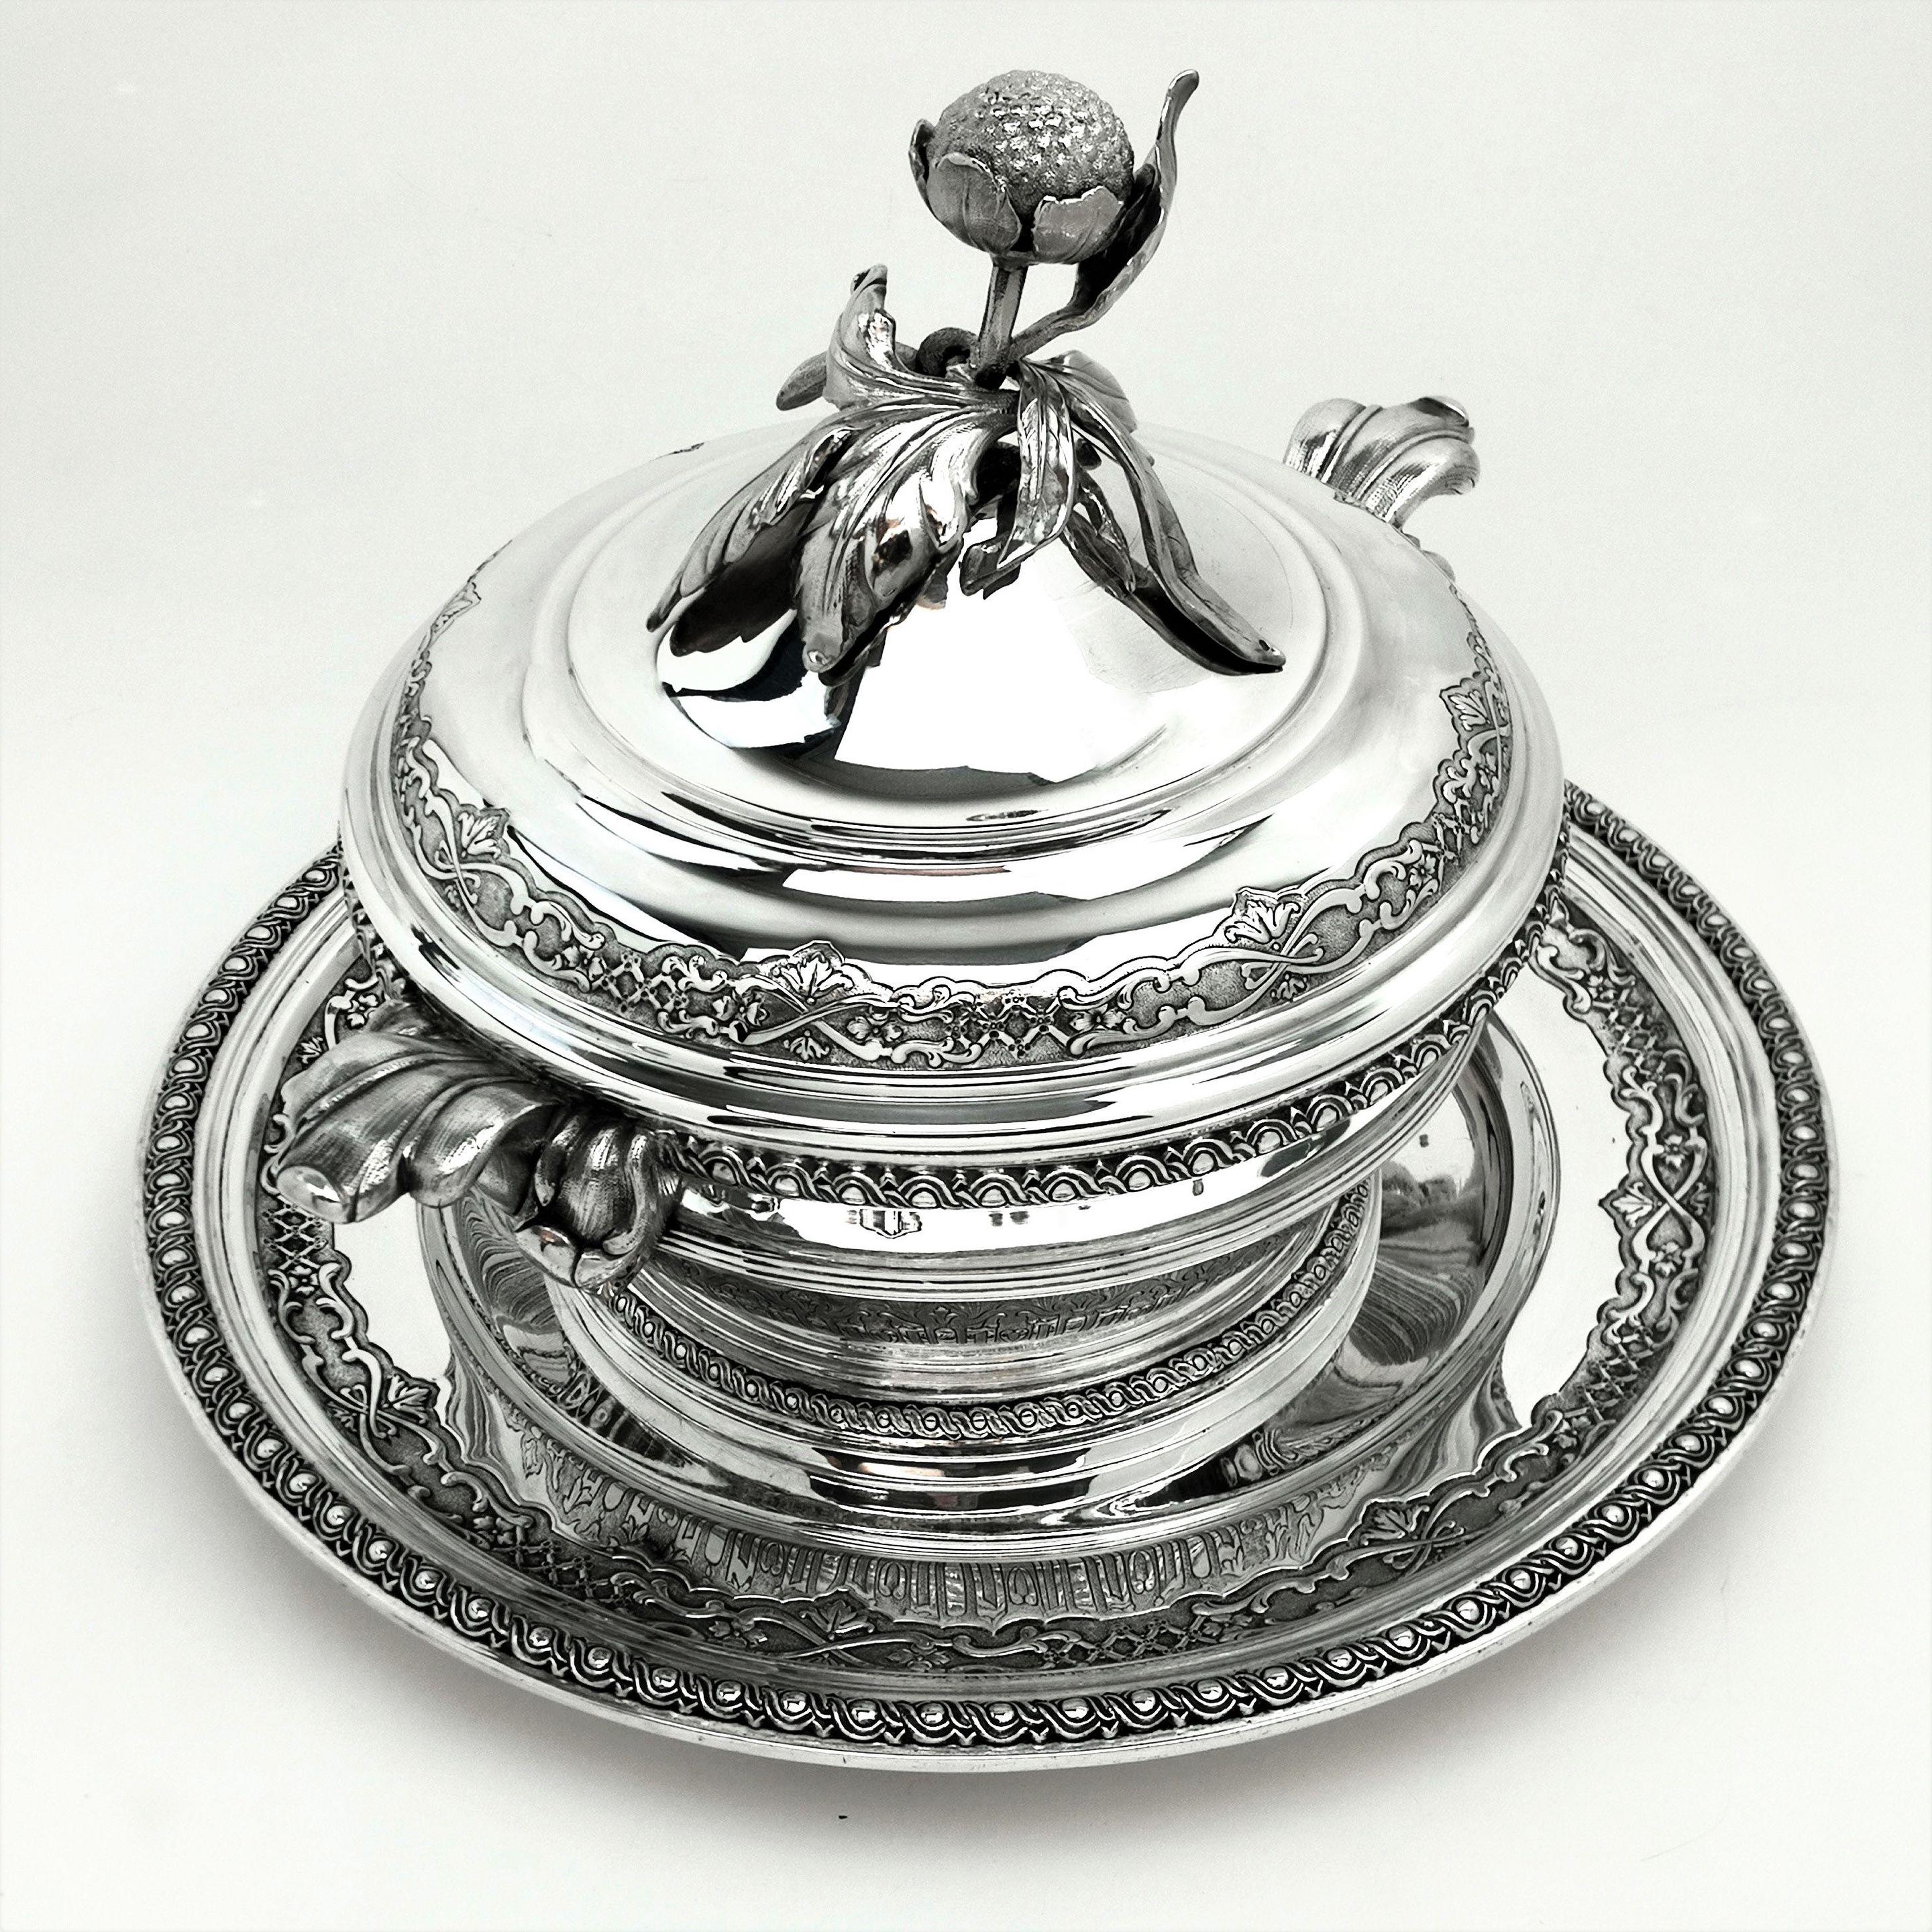 A magnificent Antique Solid Silver Soup Tureen on Stand. This Antique silver lidded Soup Tureen stands on a wide circular Platter that can be used separately as a Serving Platter. The impressive circular Tureen features a notably large Finial and